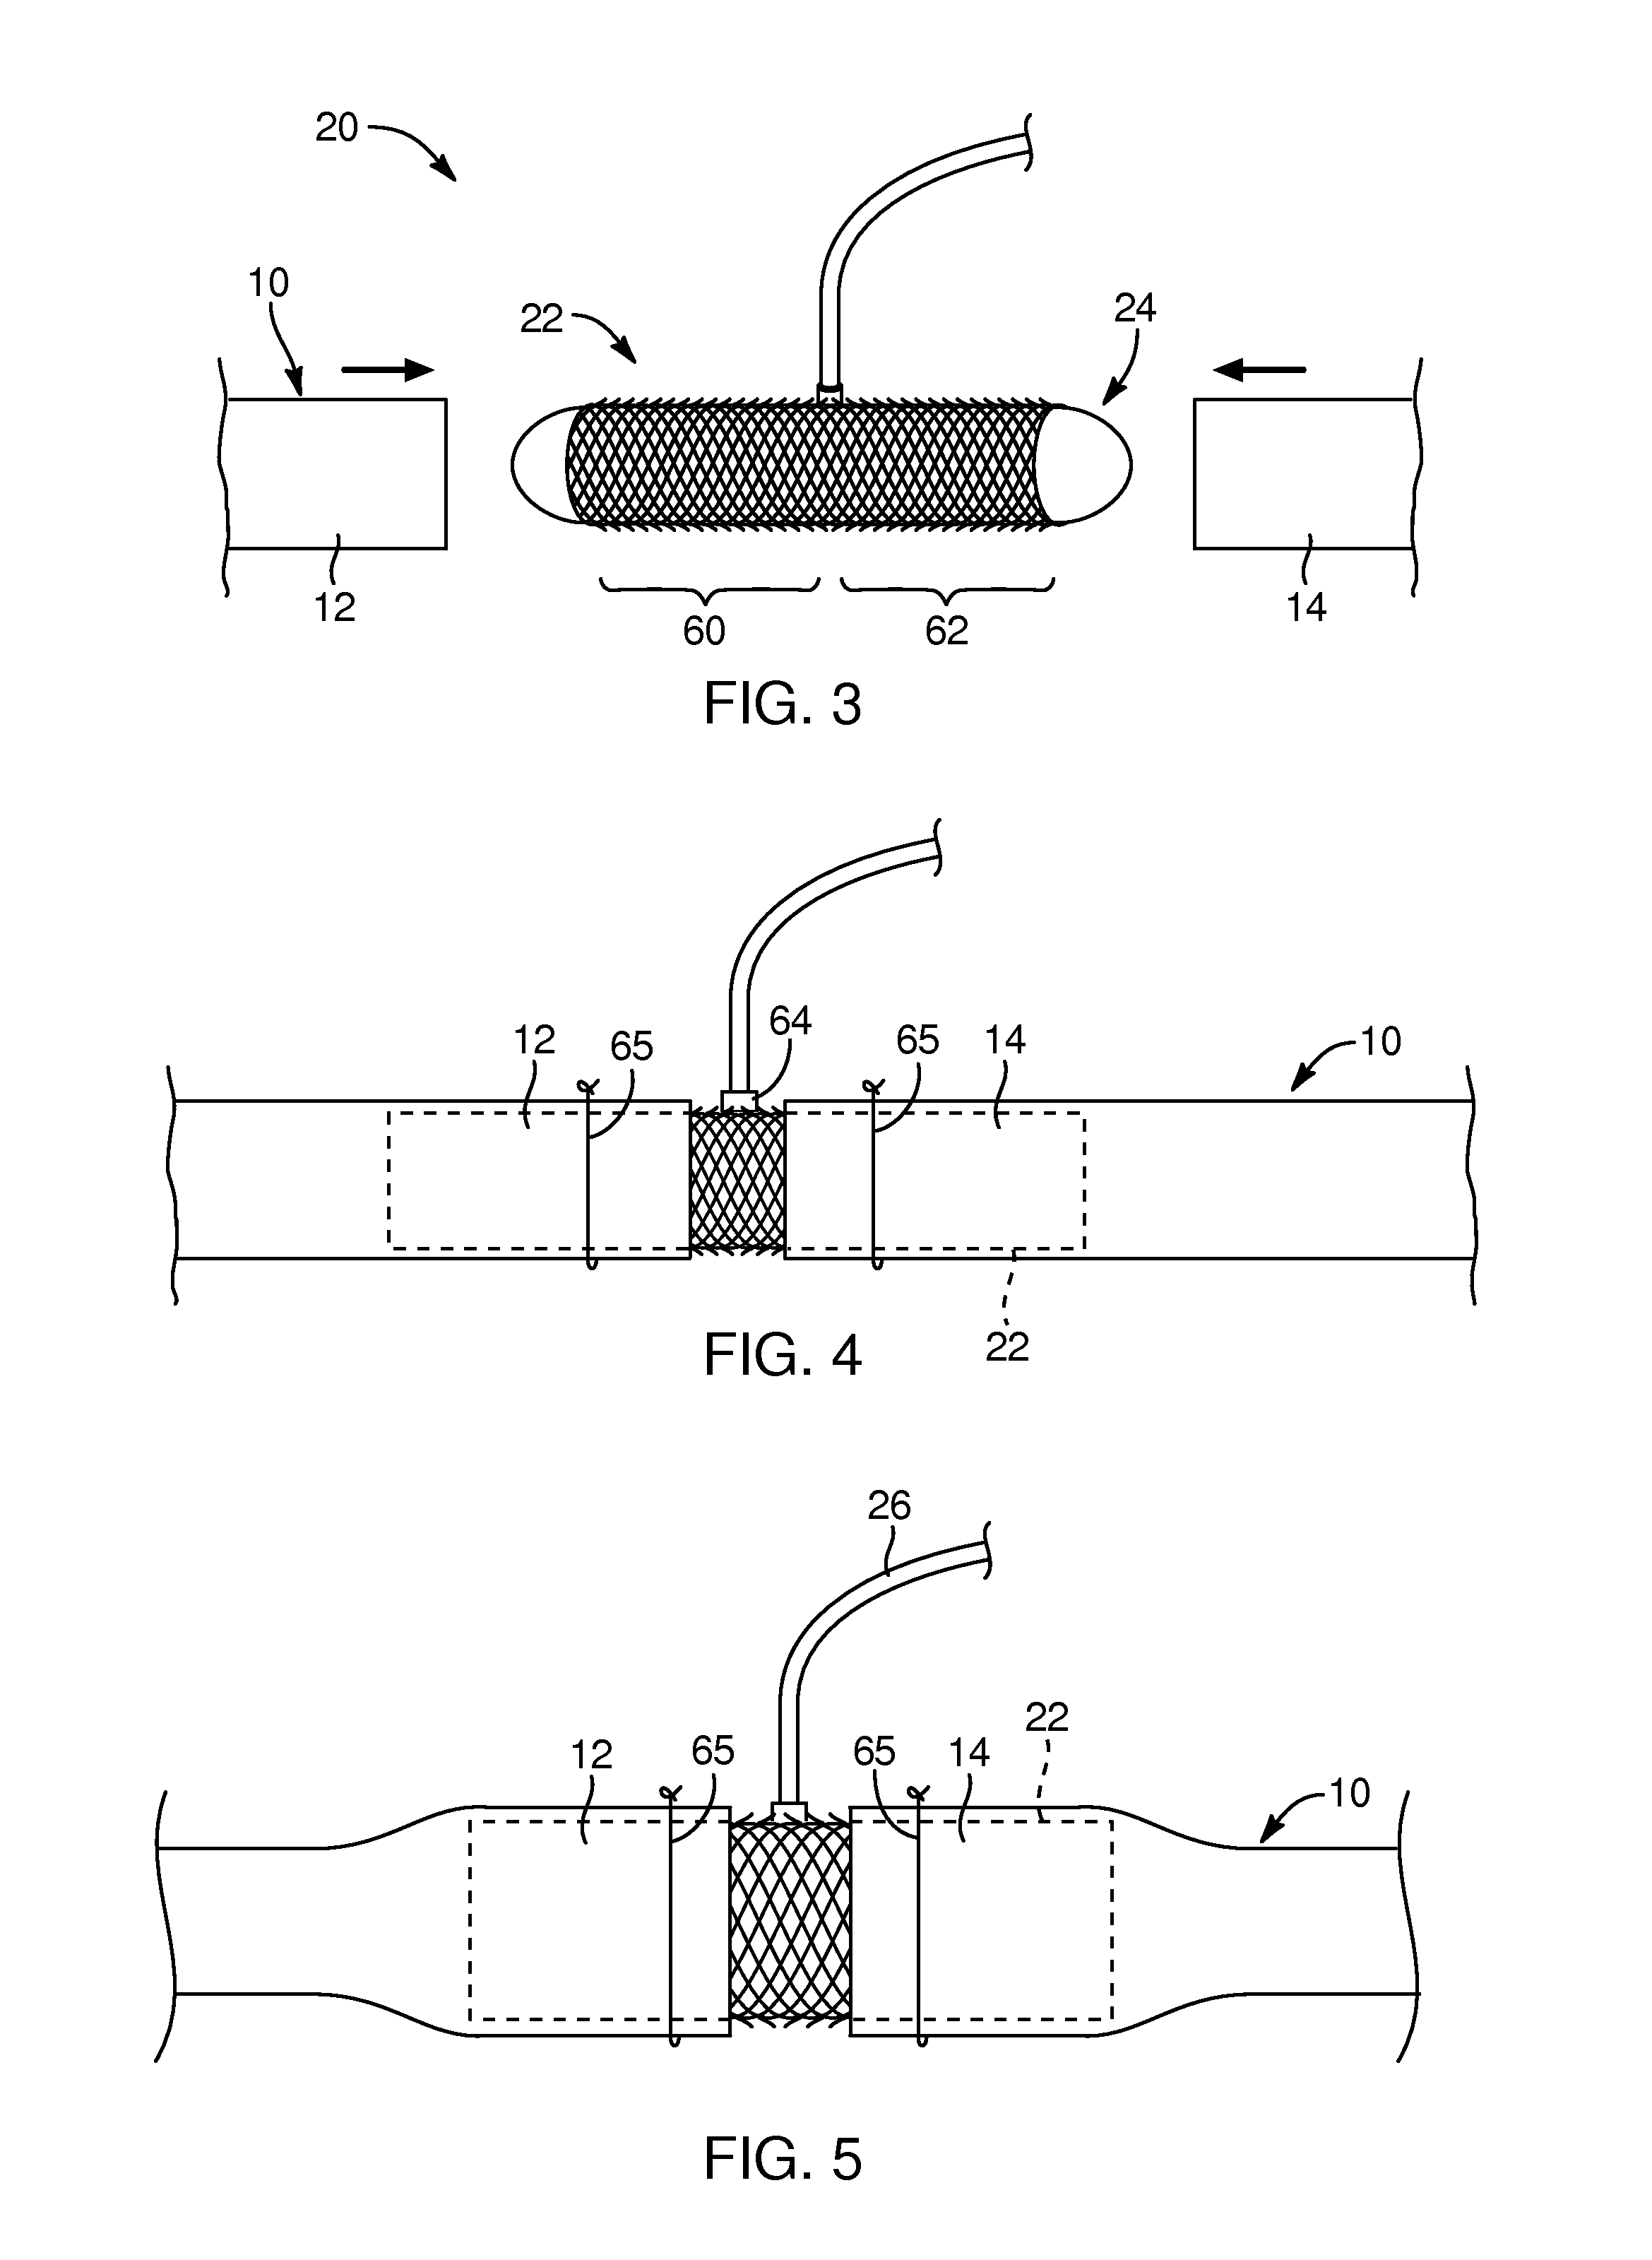 Open surgery anastomosis device, system, and method